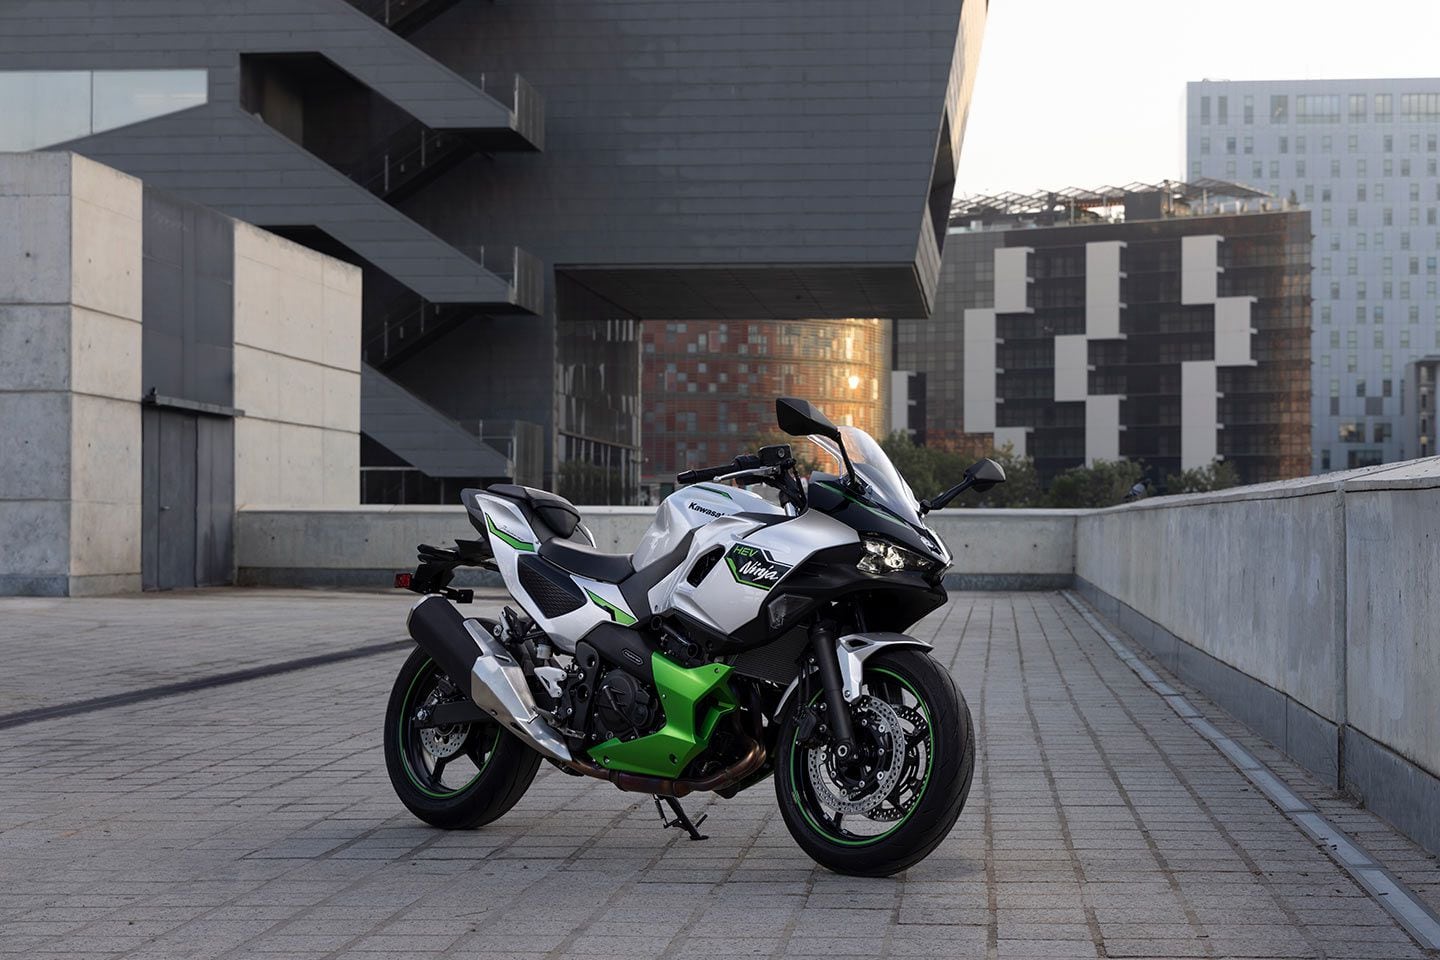 The Ninja 7 Hybrid is a blend of aggressive Kawasaki styling, larger fairings, and air ducts, the latter two features helping conceal the added hardware and improve cooling.